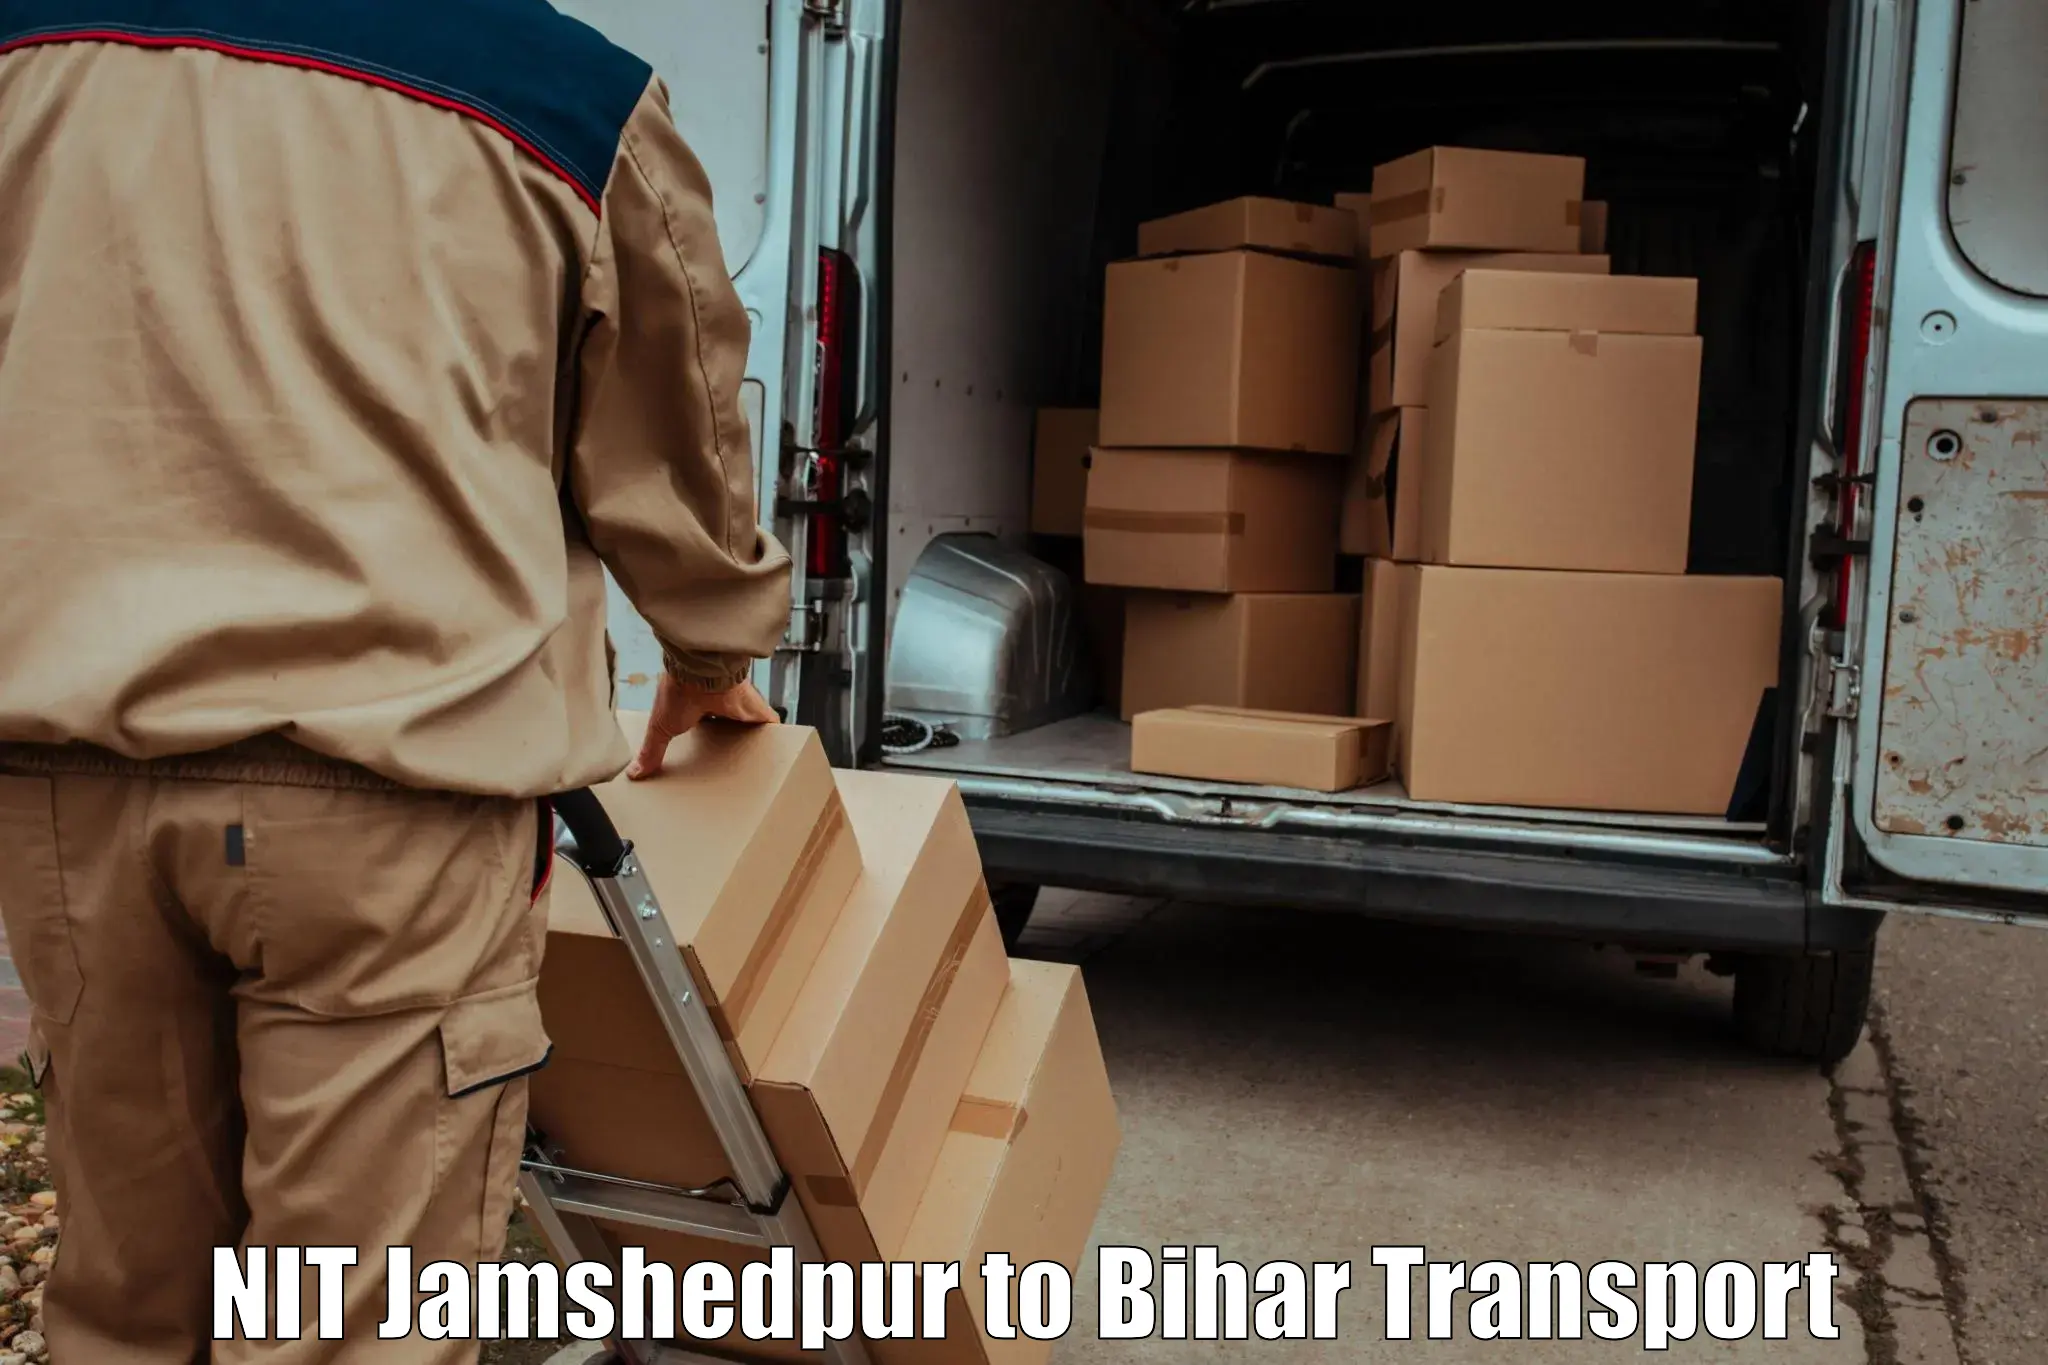 Package delivery services NIT Jamshedpur to Palasi Araria